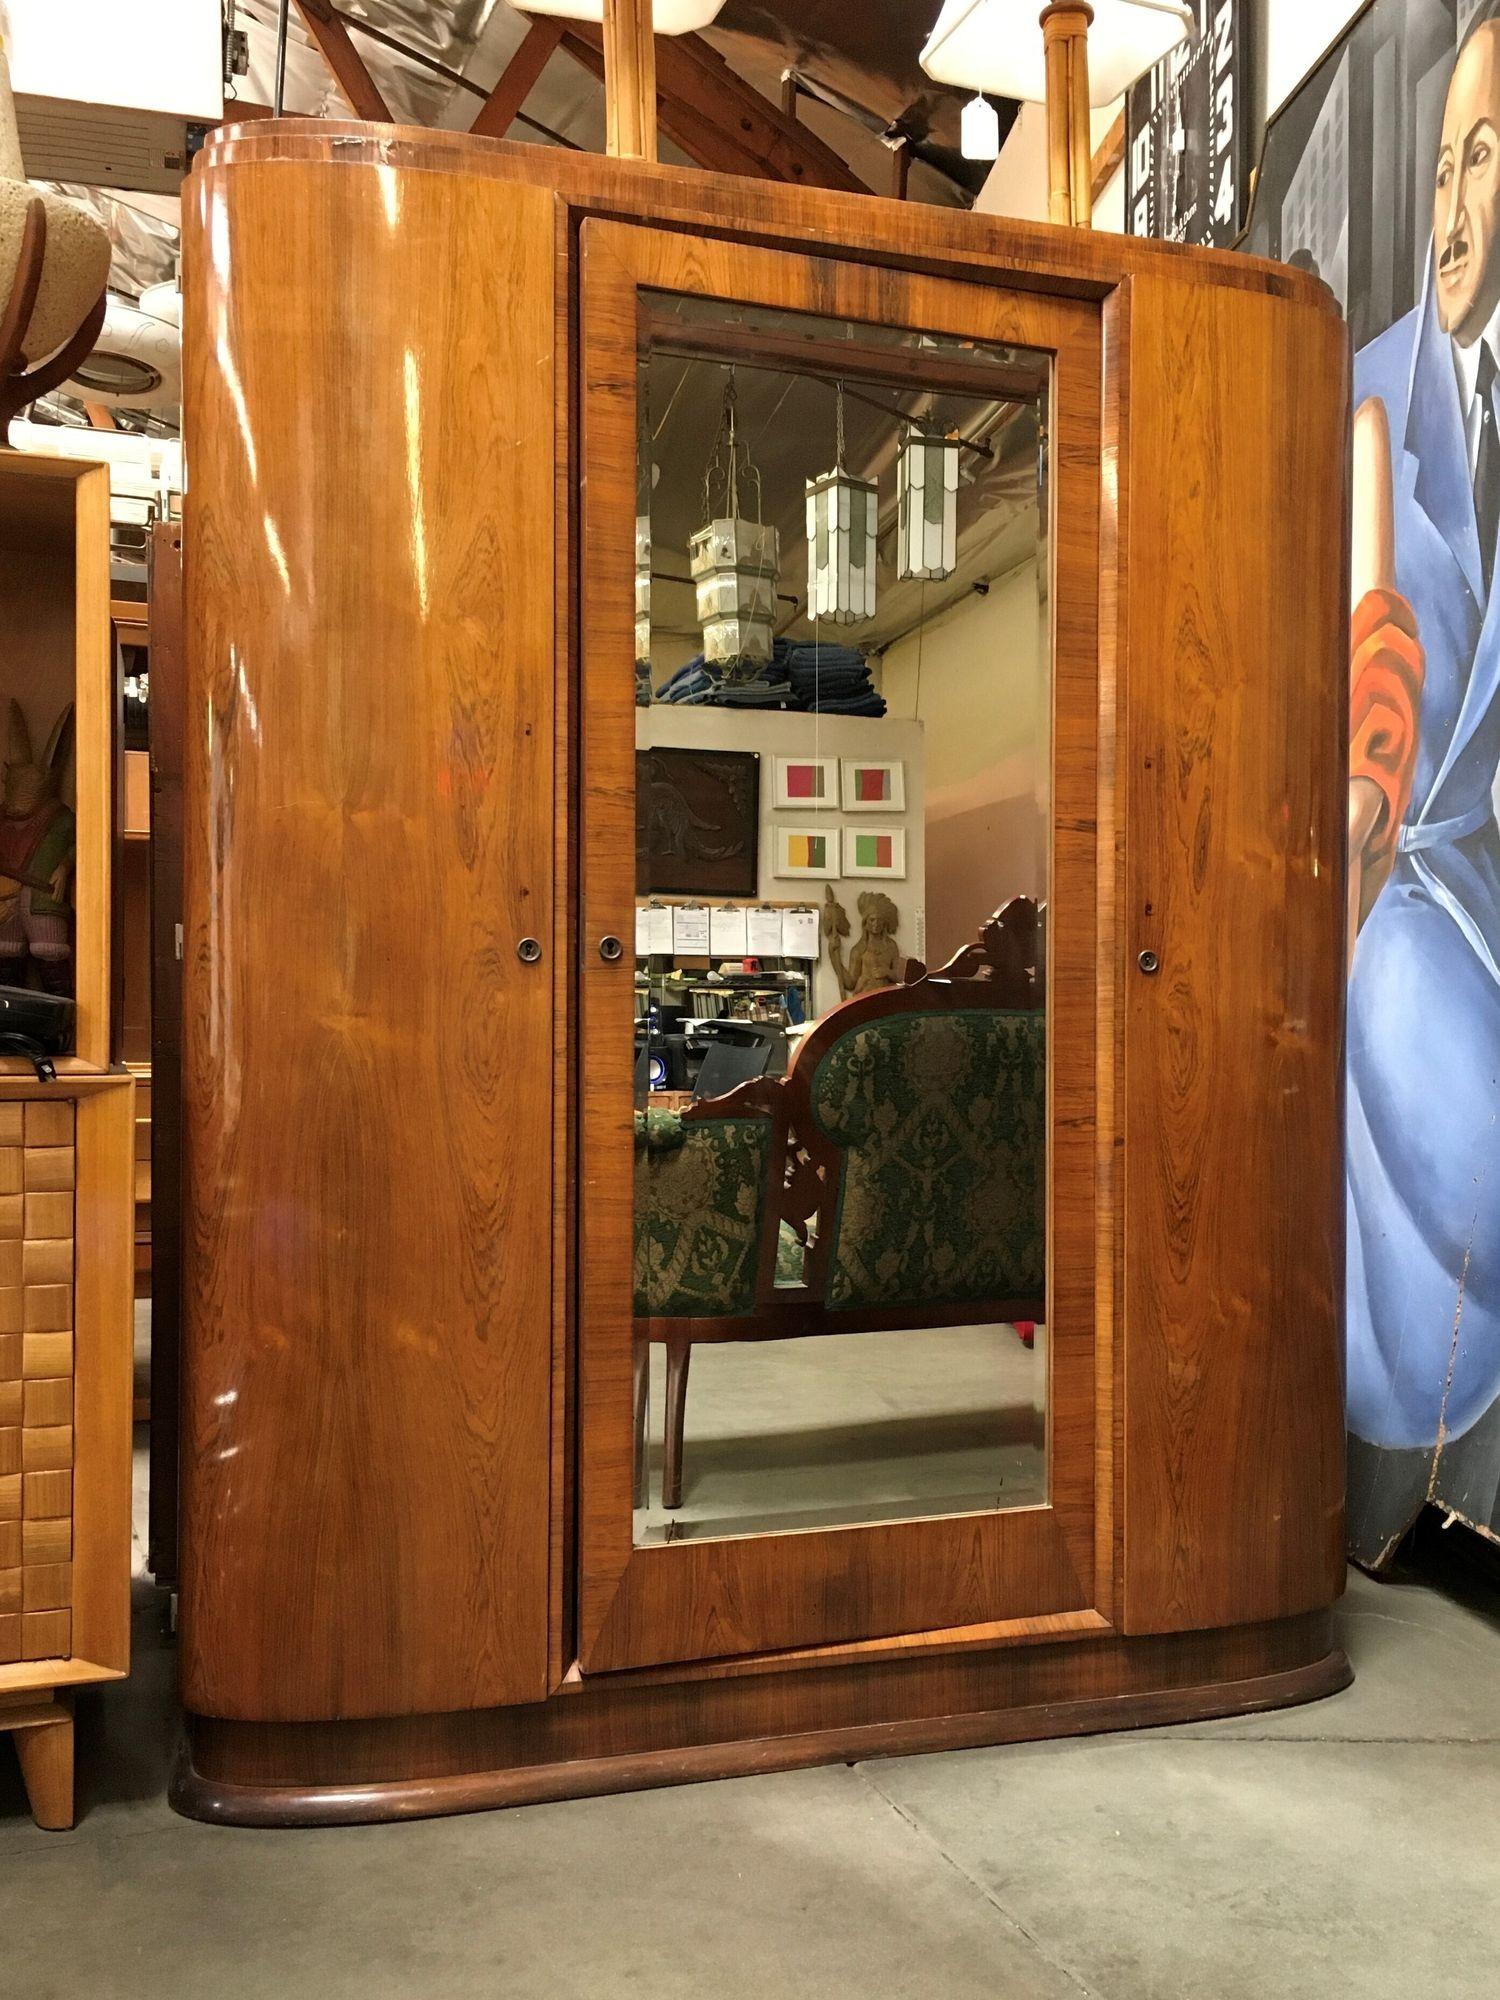 Vintage Art Deco Solid Walnut Wood Armoire / Wardrobe.$1,475
 
This solid walnut wood armoire has been made to last. Originally made in France, it features a total 3 front doors. Middle one has a mirror insert with beautiful beveled edges. 2 side